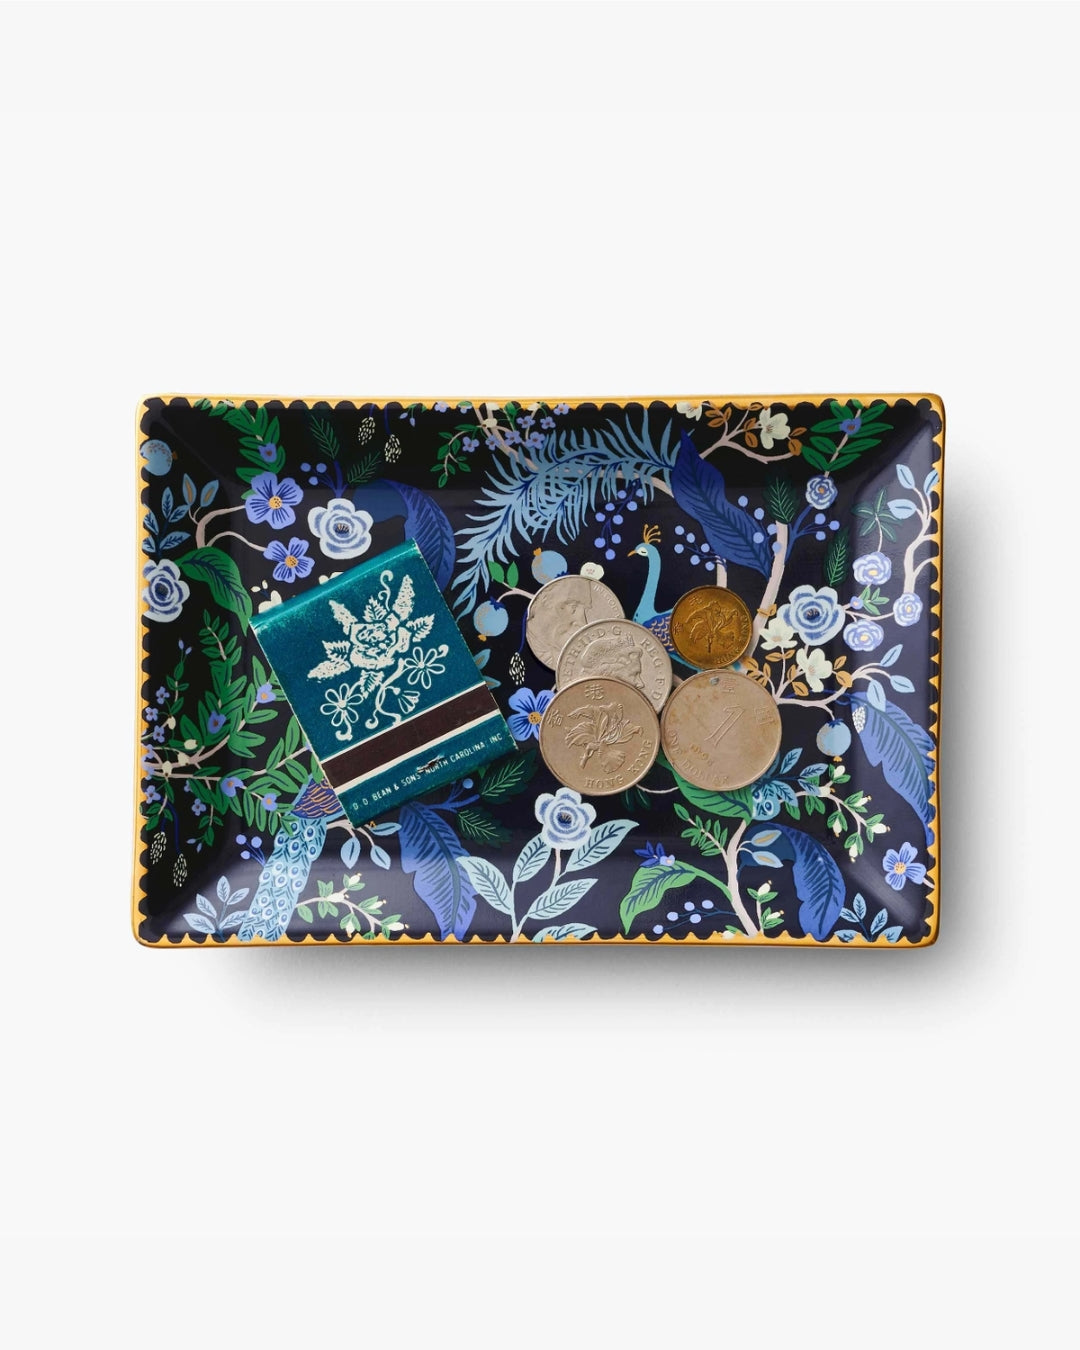 Catchall Tray - Peacock [PRE ORDER]